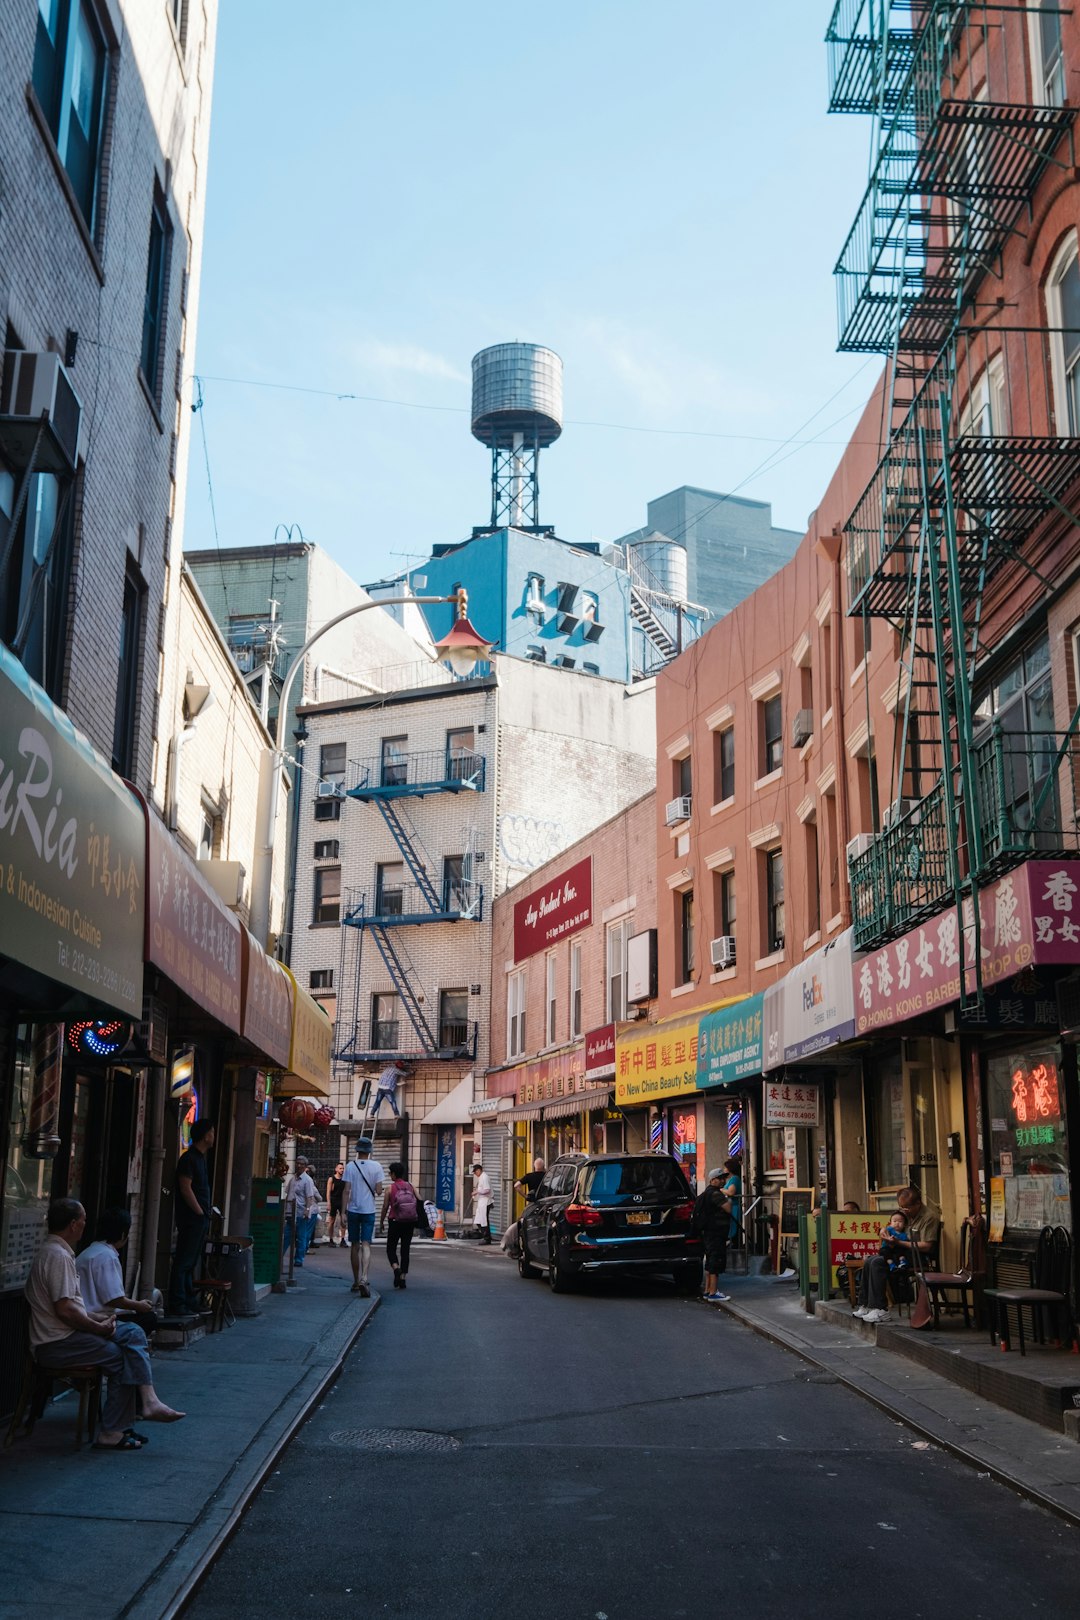 Travel Tips and Stories of Chinatown in United States